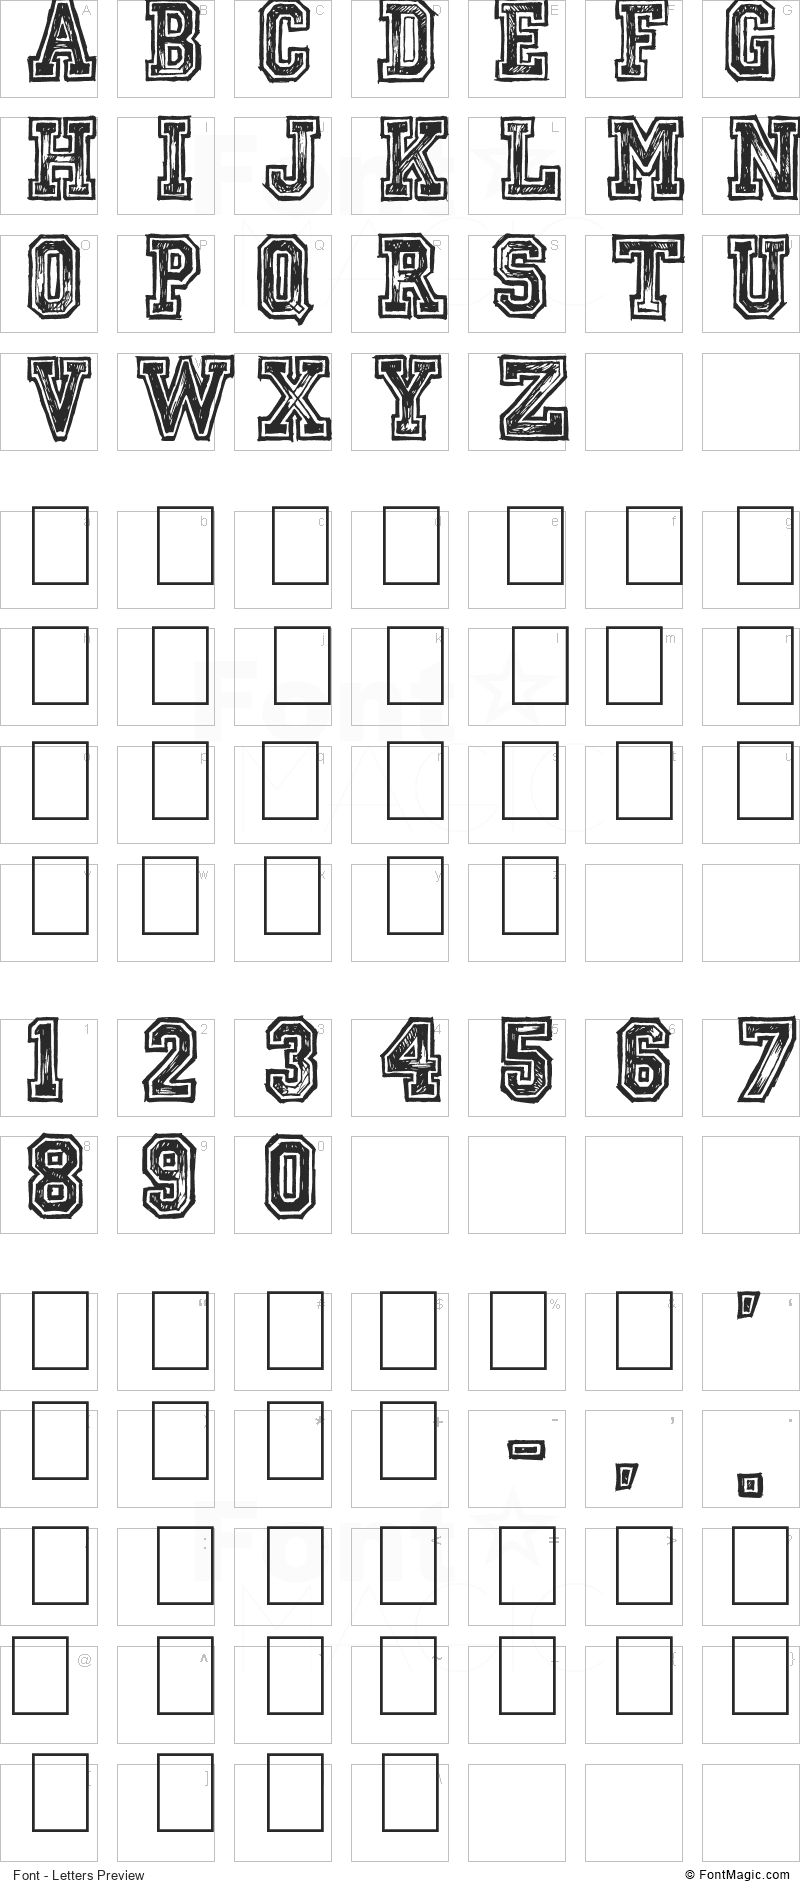 Mickey’s School Font - All Latters Preview Chart